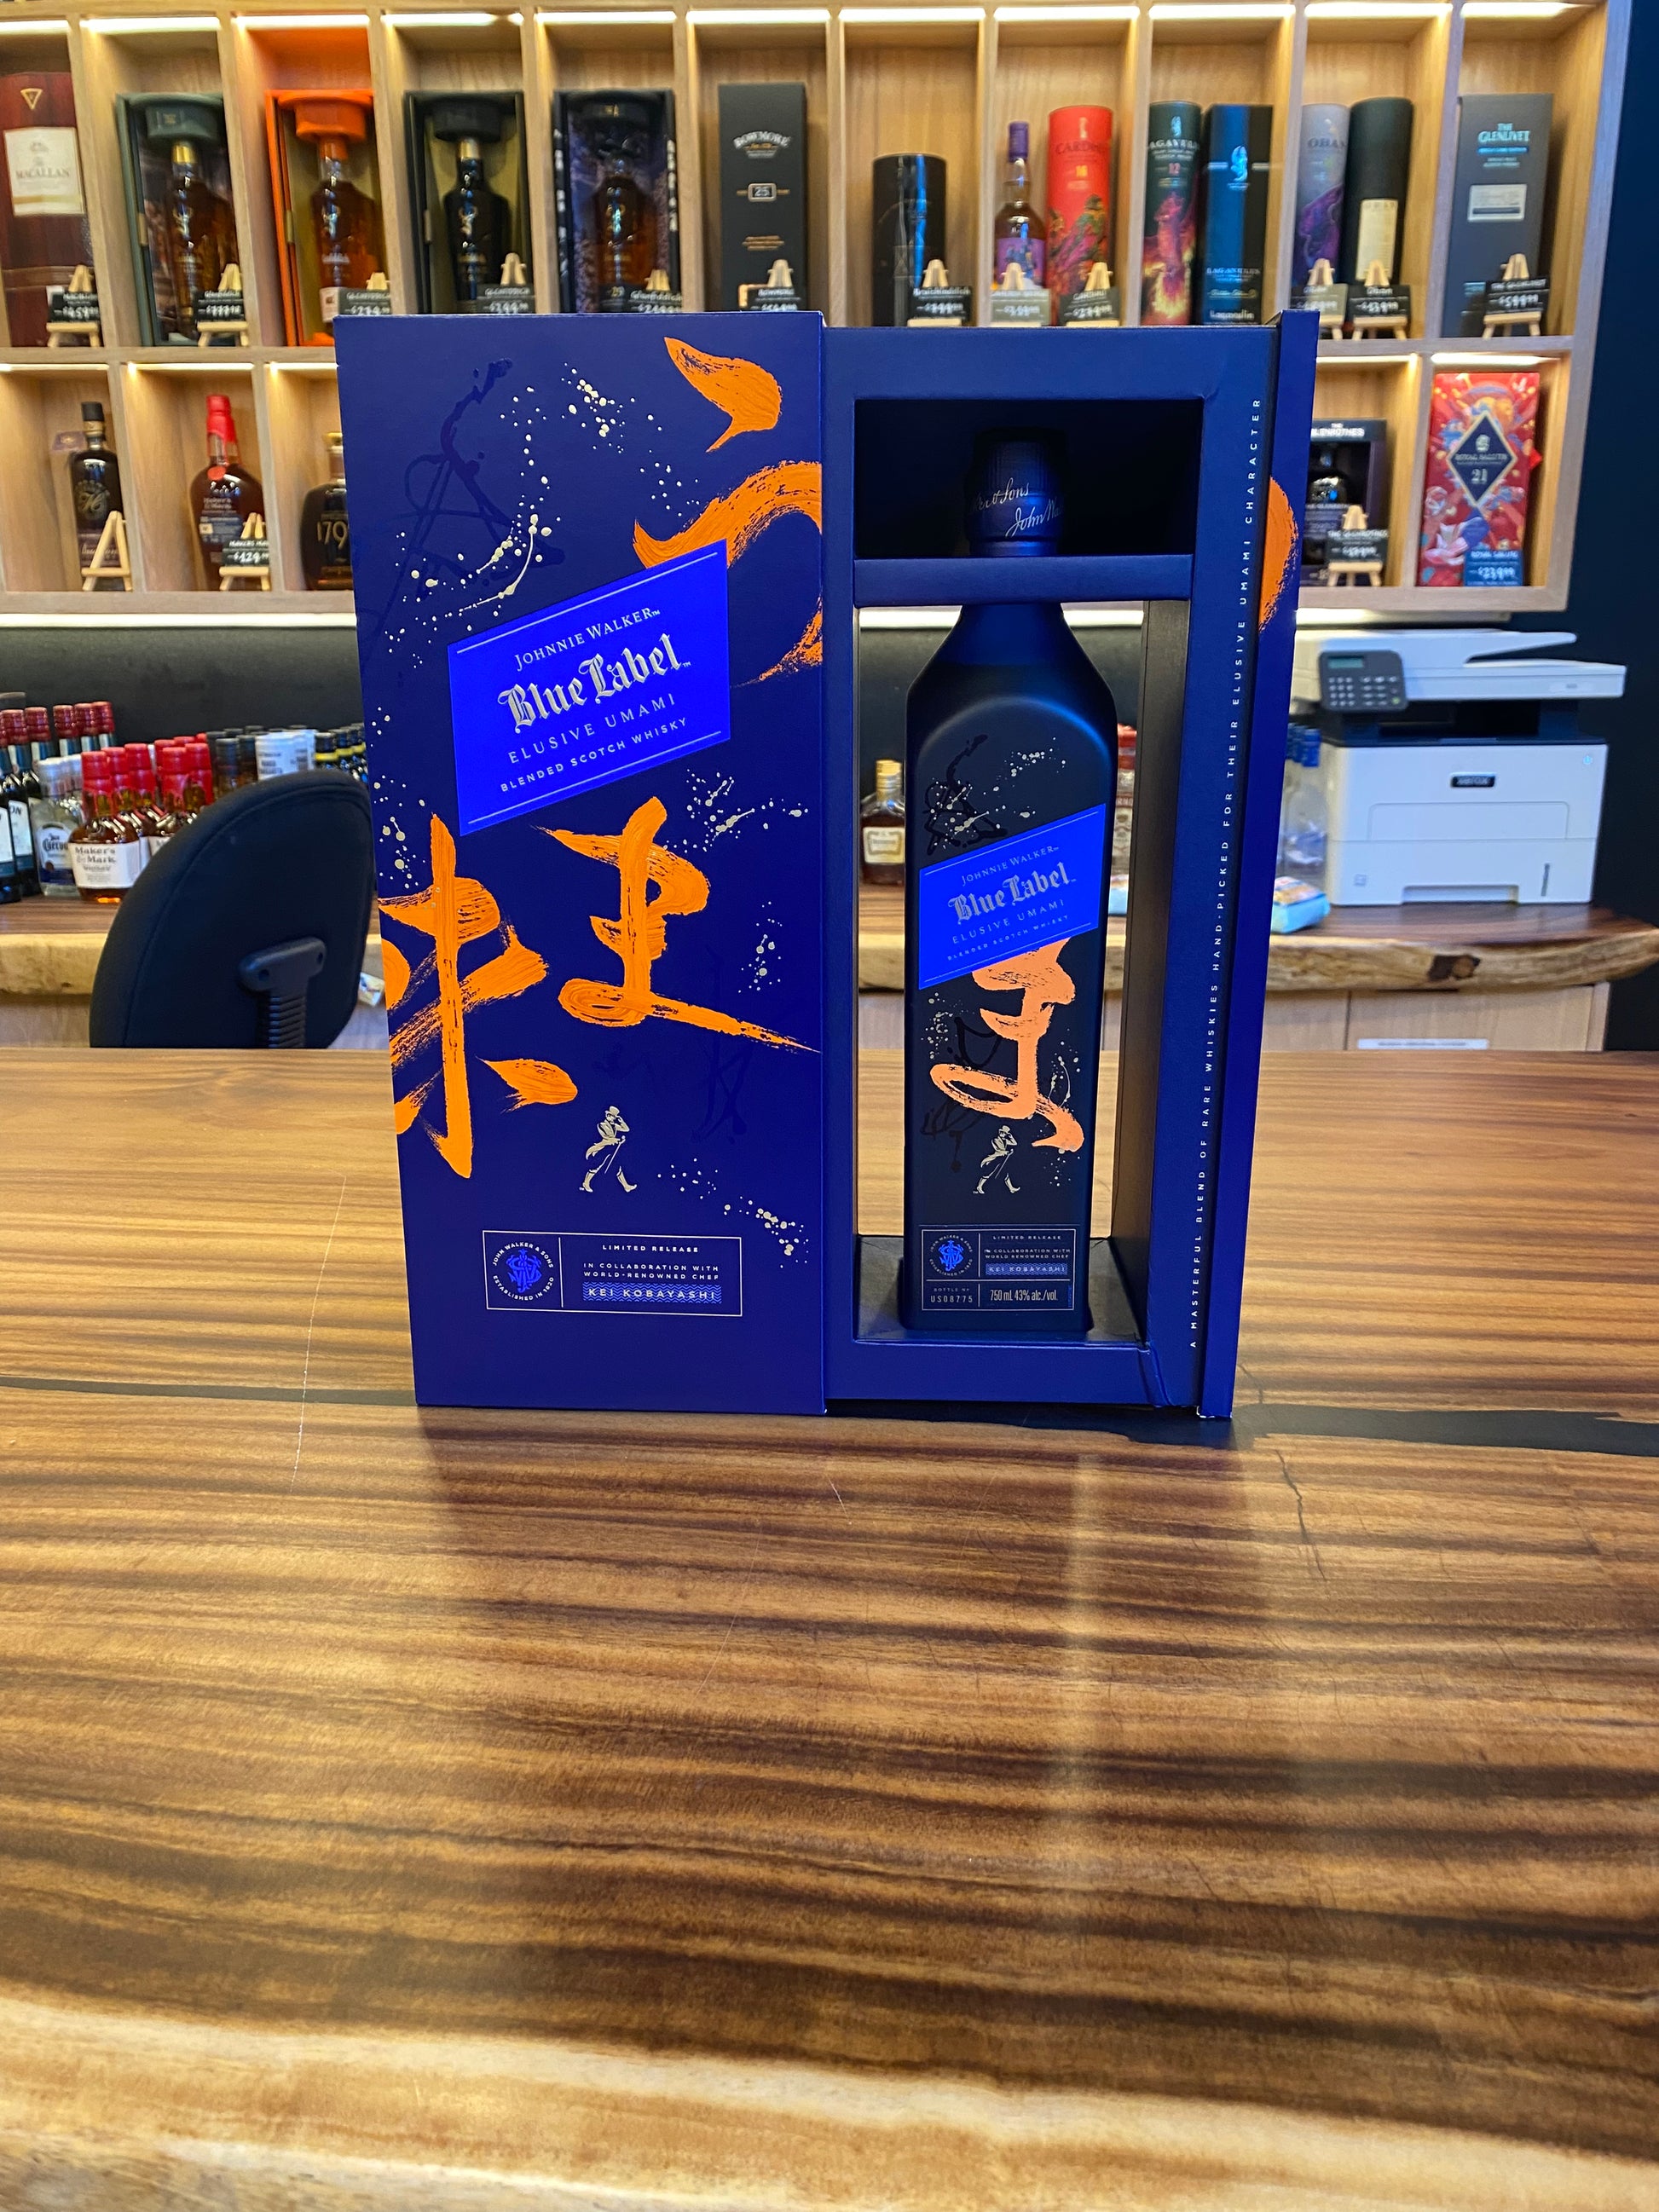 Buy Johnnie Walker Blue Label online at  and have it  shipped to your door